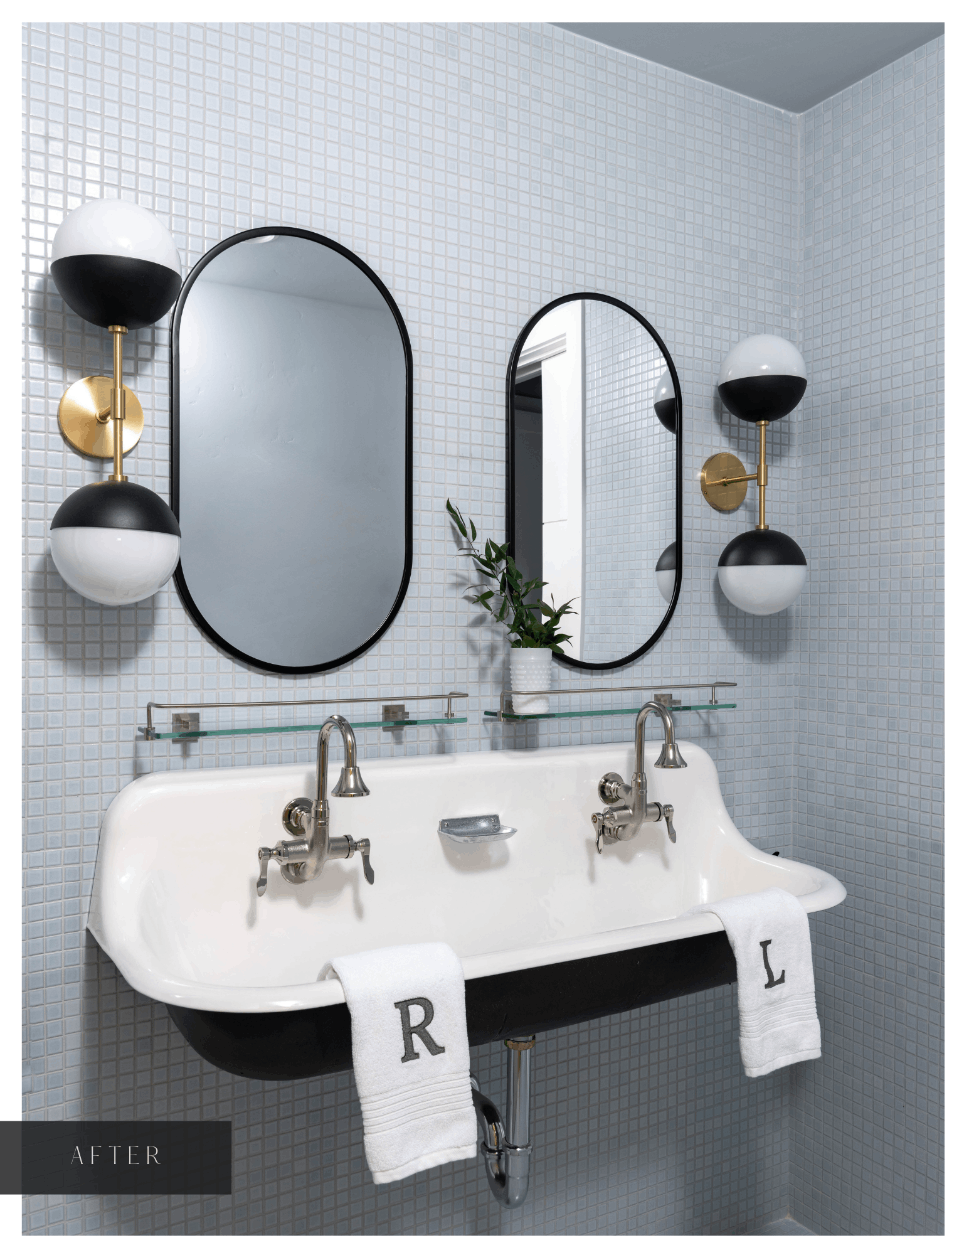 Industrial Elements and Floor-to-Ceiling Tile Keep the Girls' Bathroom Chic and Clean